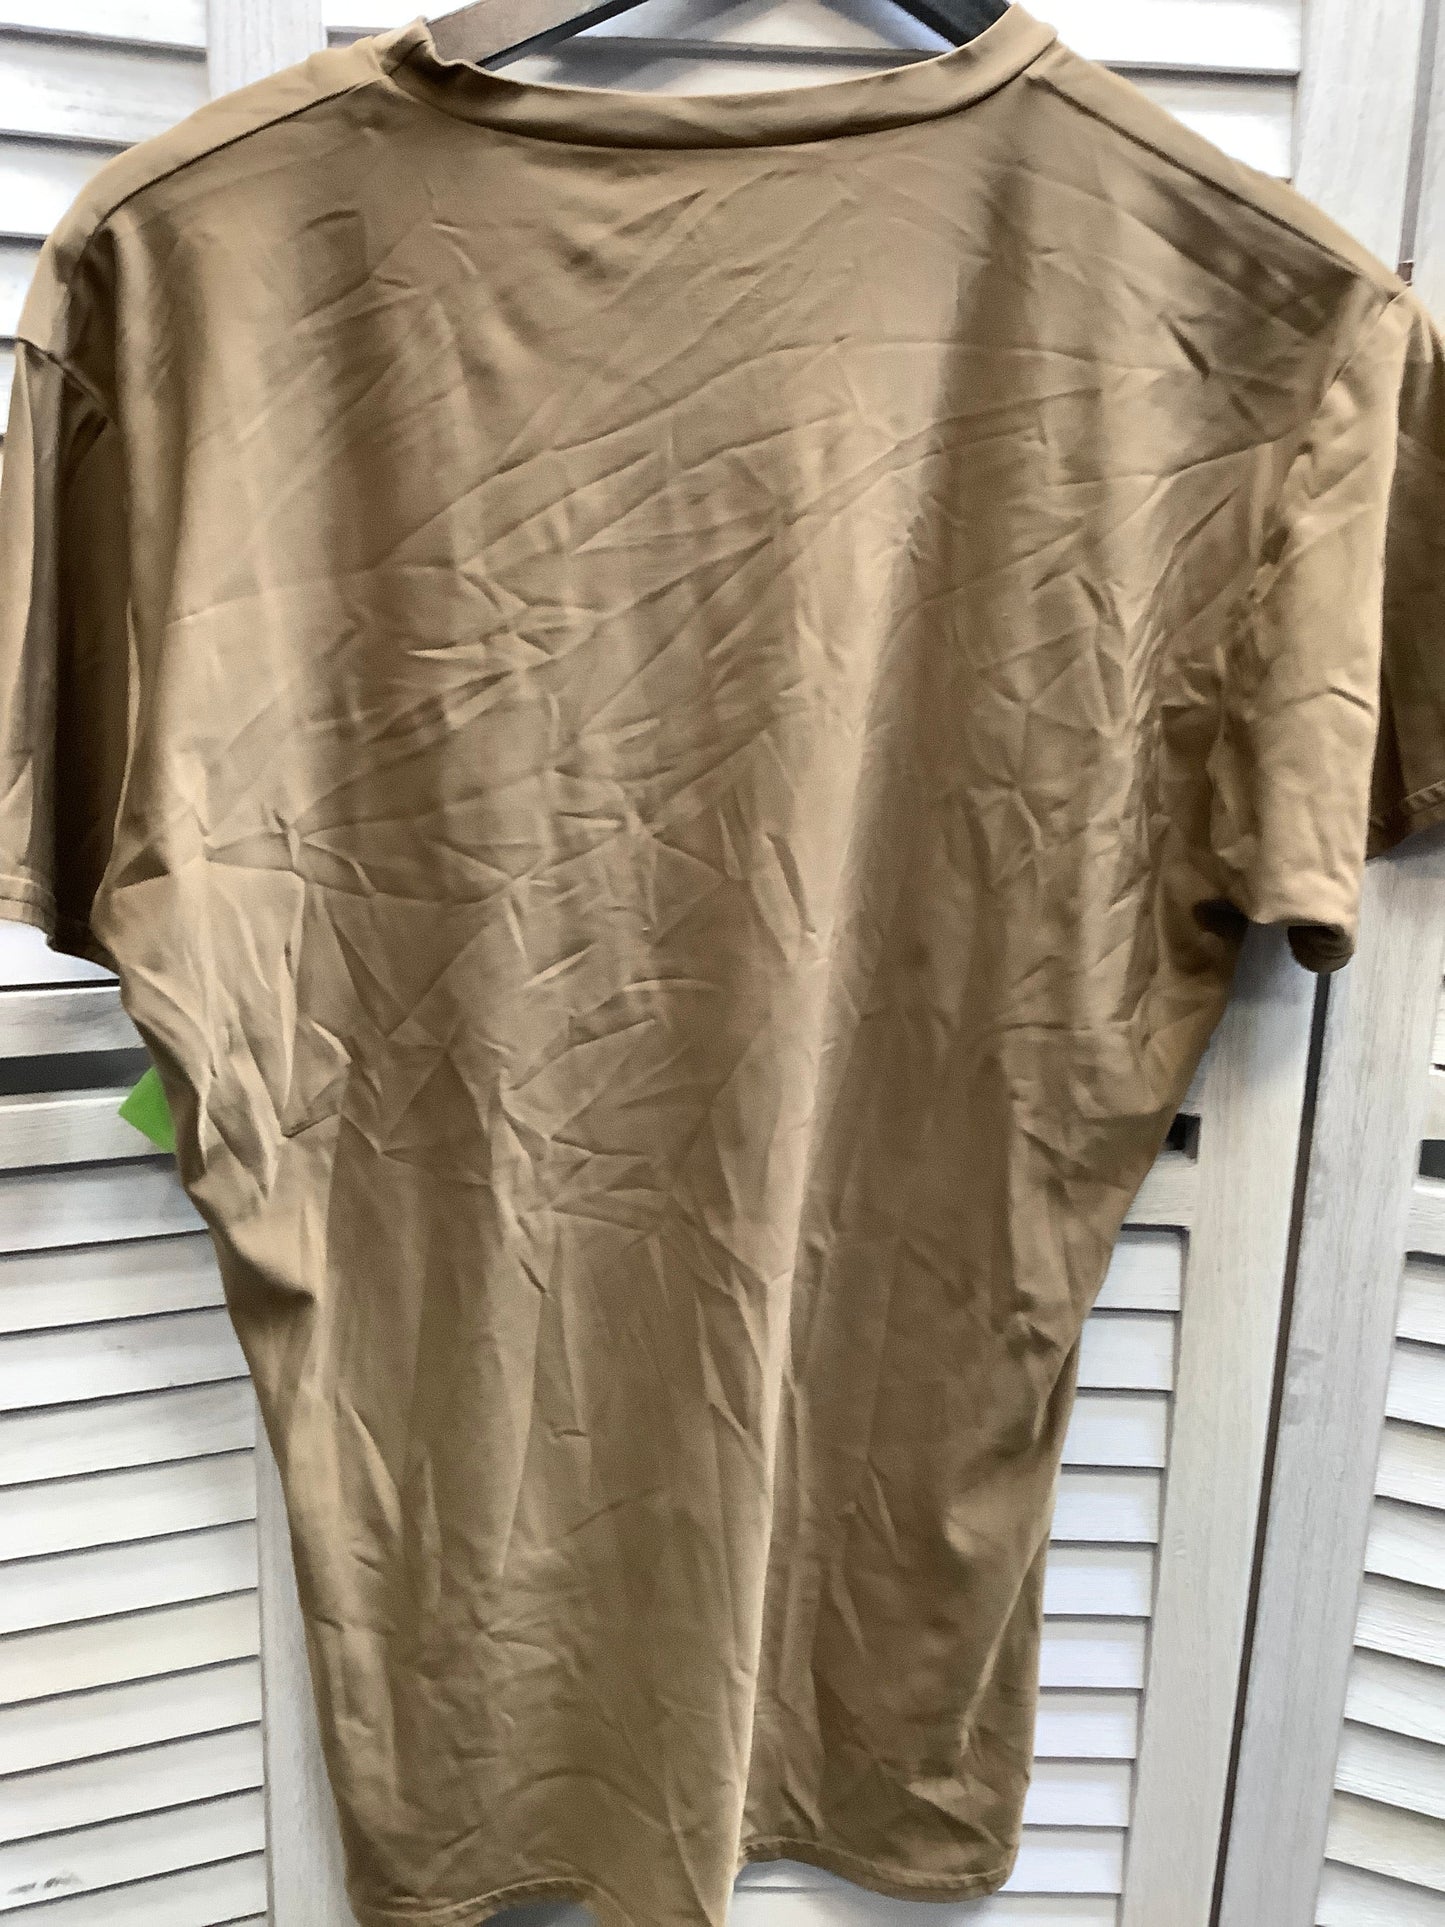 Brown Athletic Top Short Sleeve Under Armour, Size Xl